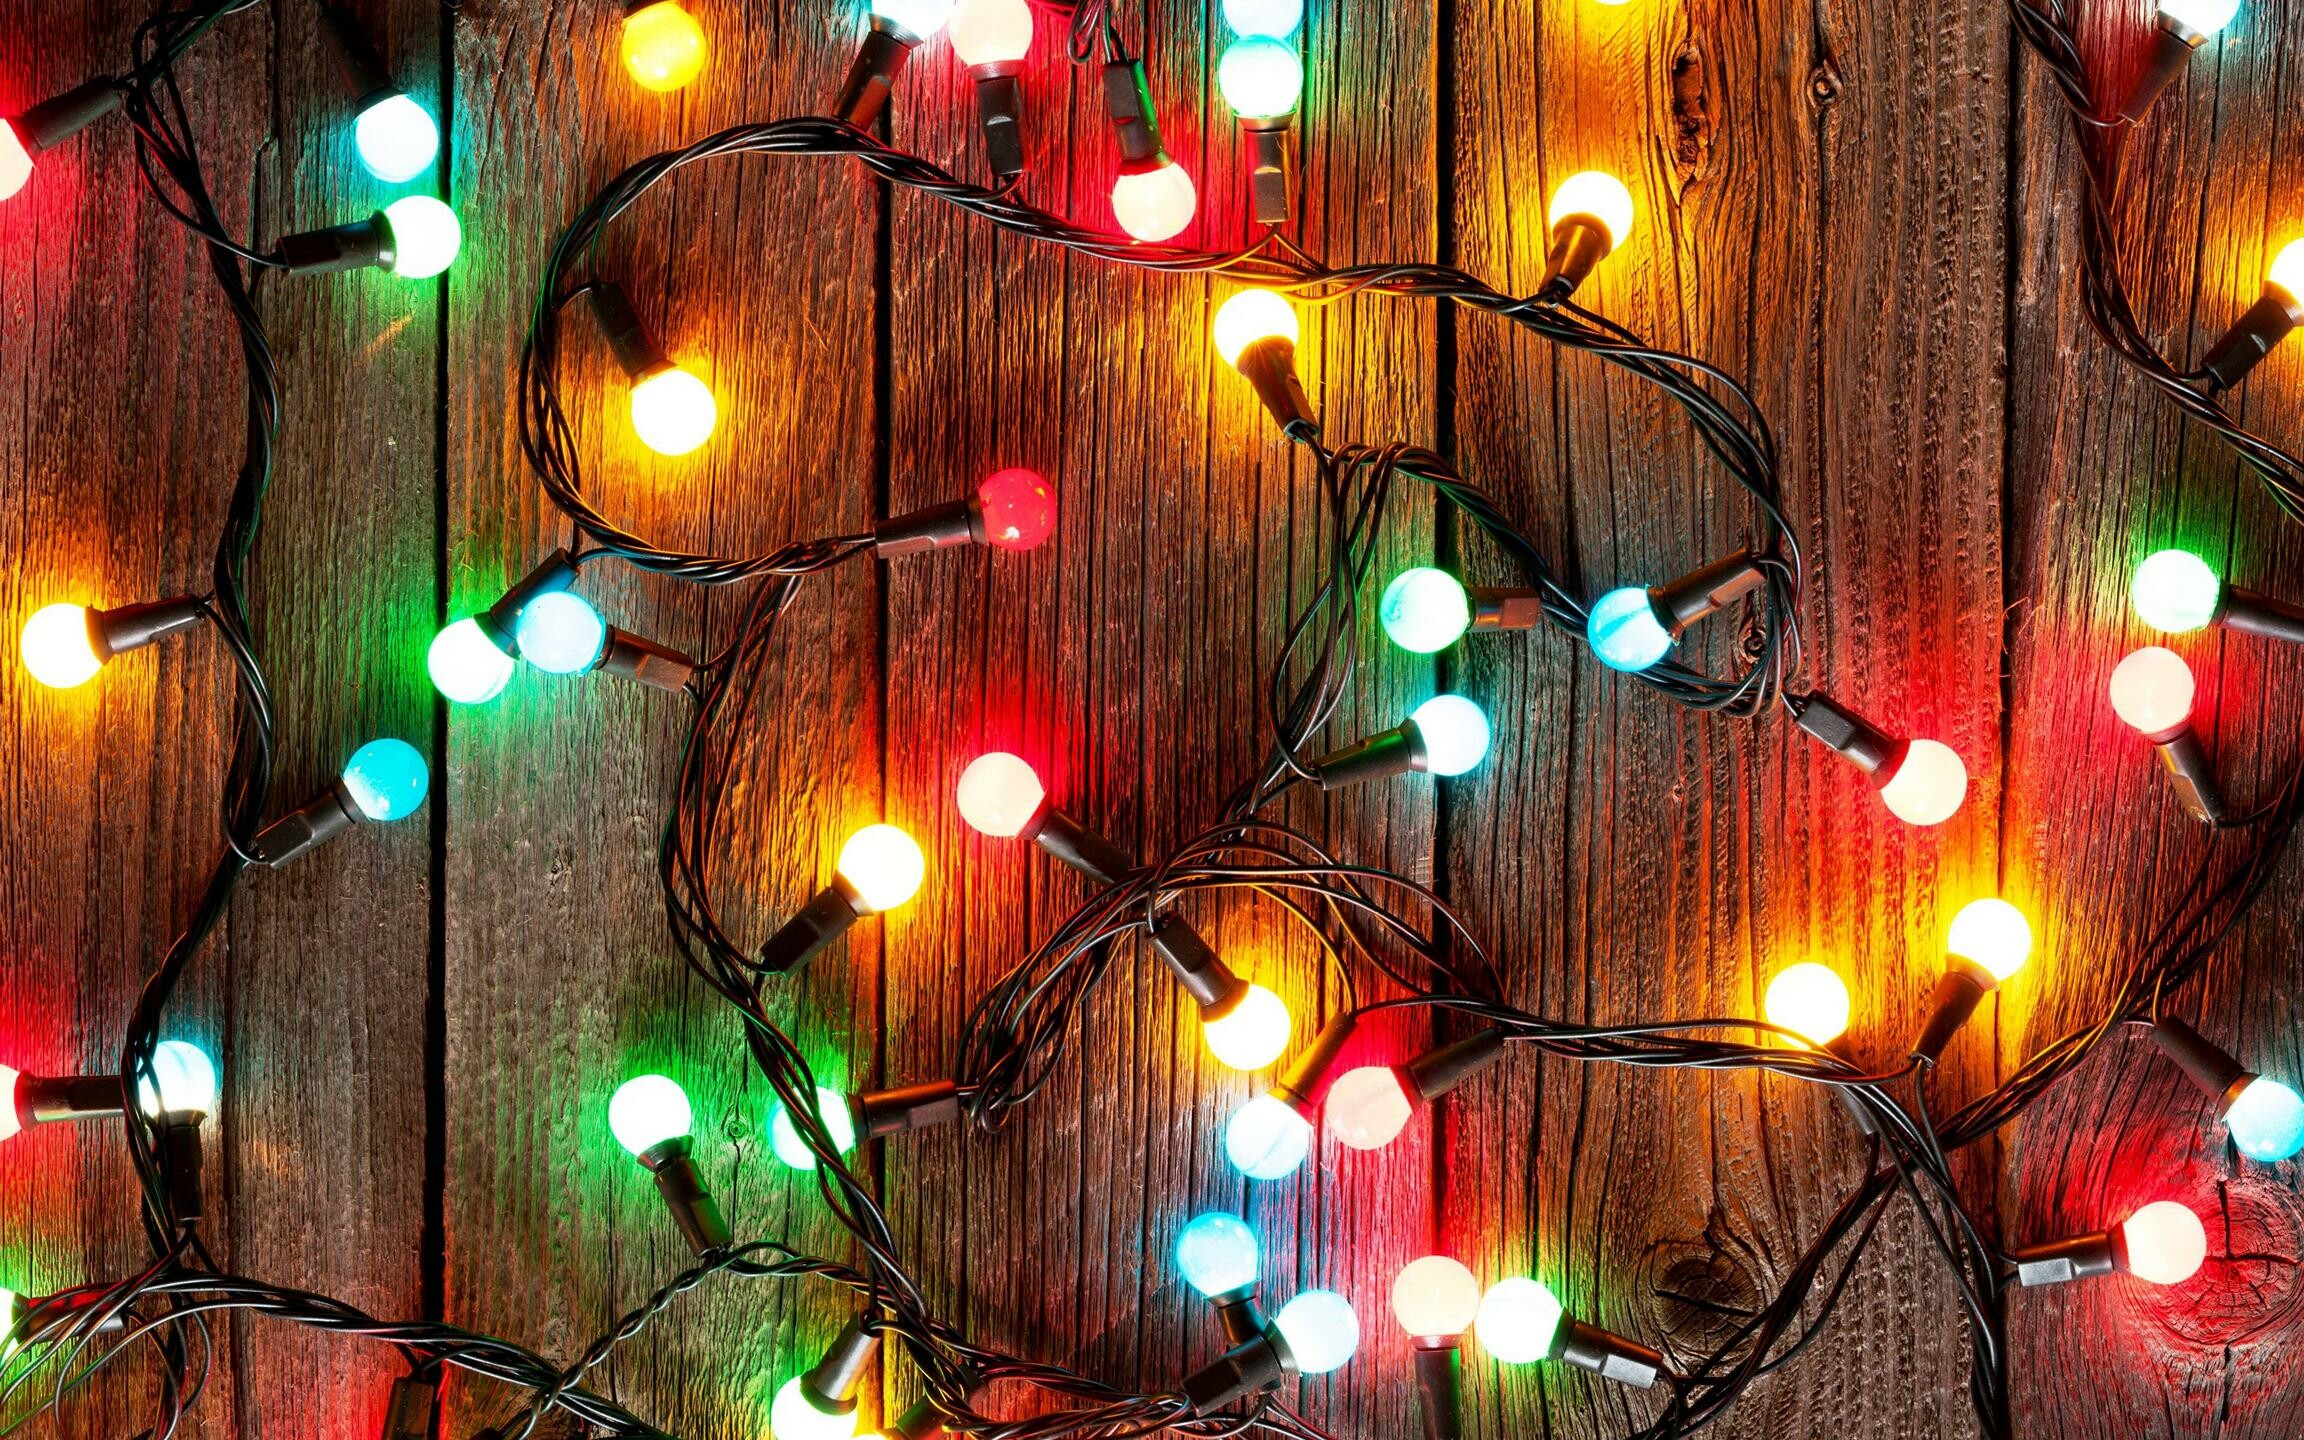 Christmas Lights: Common lamp types are incandescent light bulbs and a light-emitting diodes. 2310x1440 HD Wallpaper.